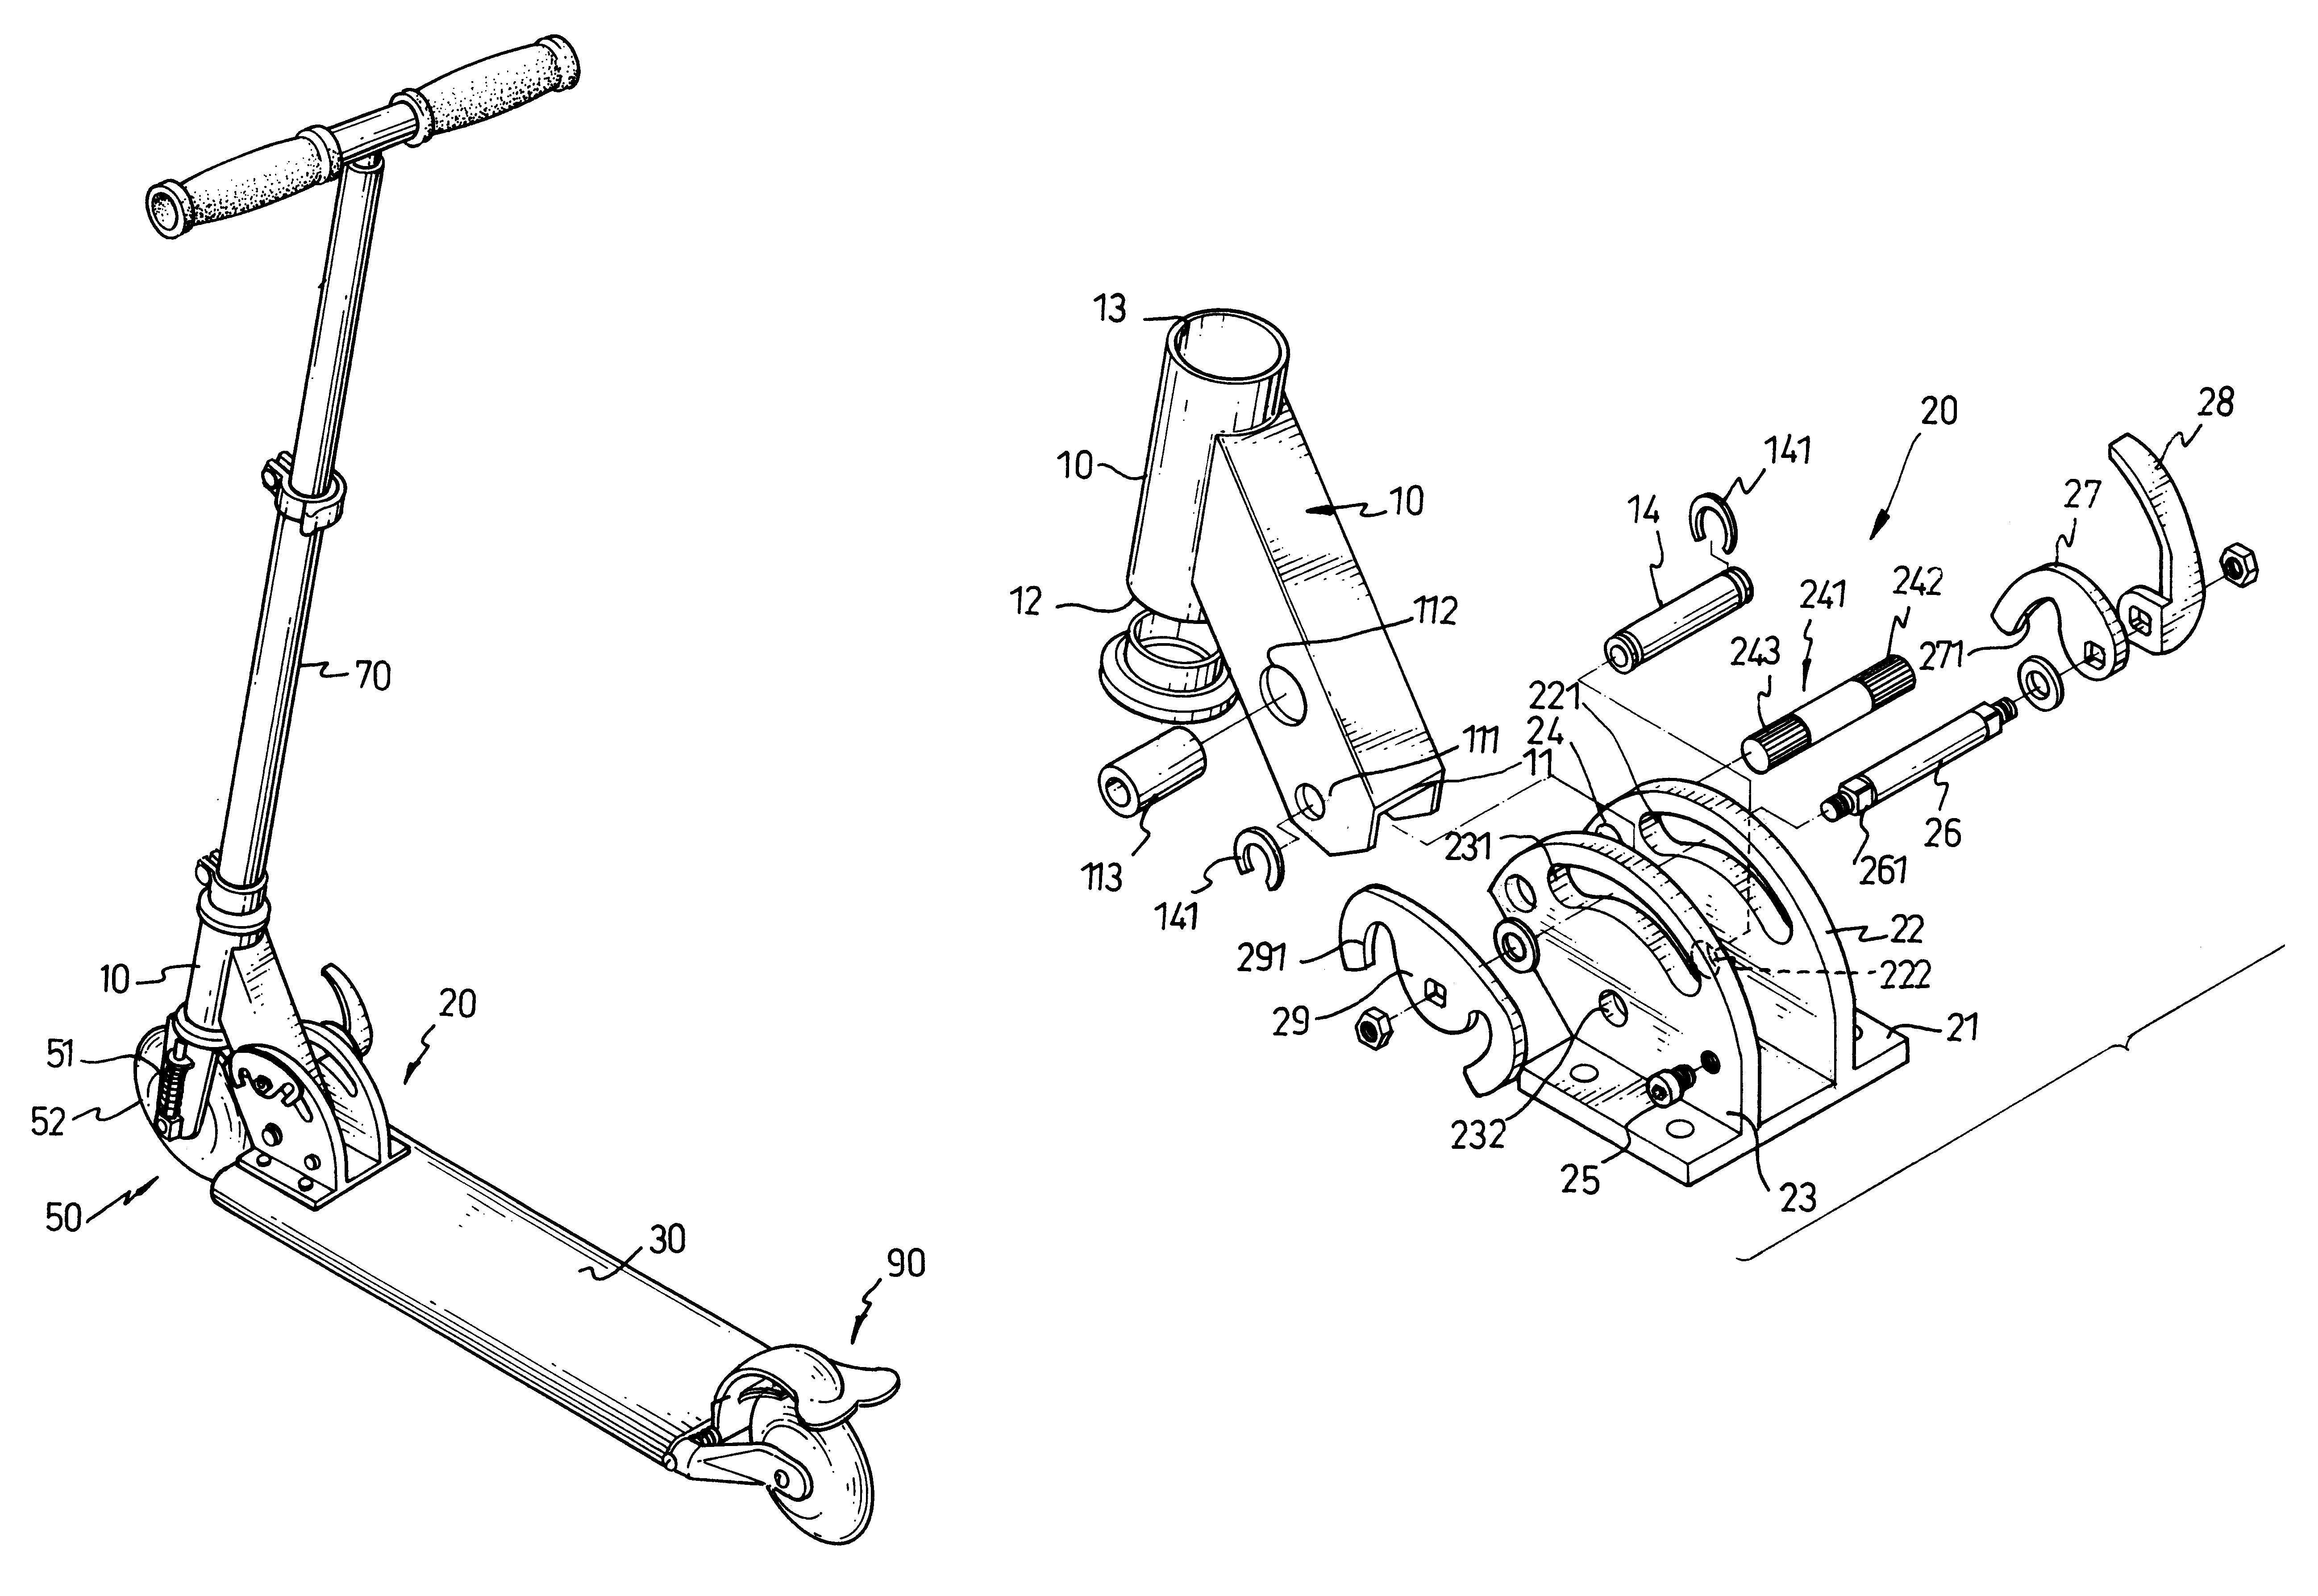 Foldable scooter with head tube assembly, brake and suspension